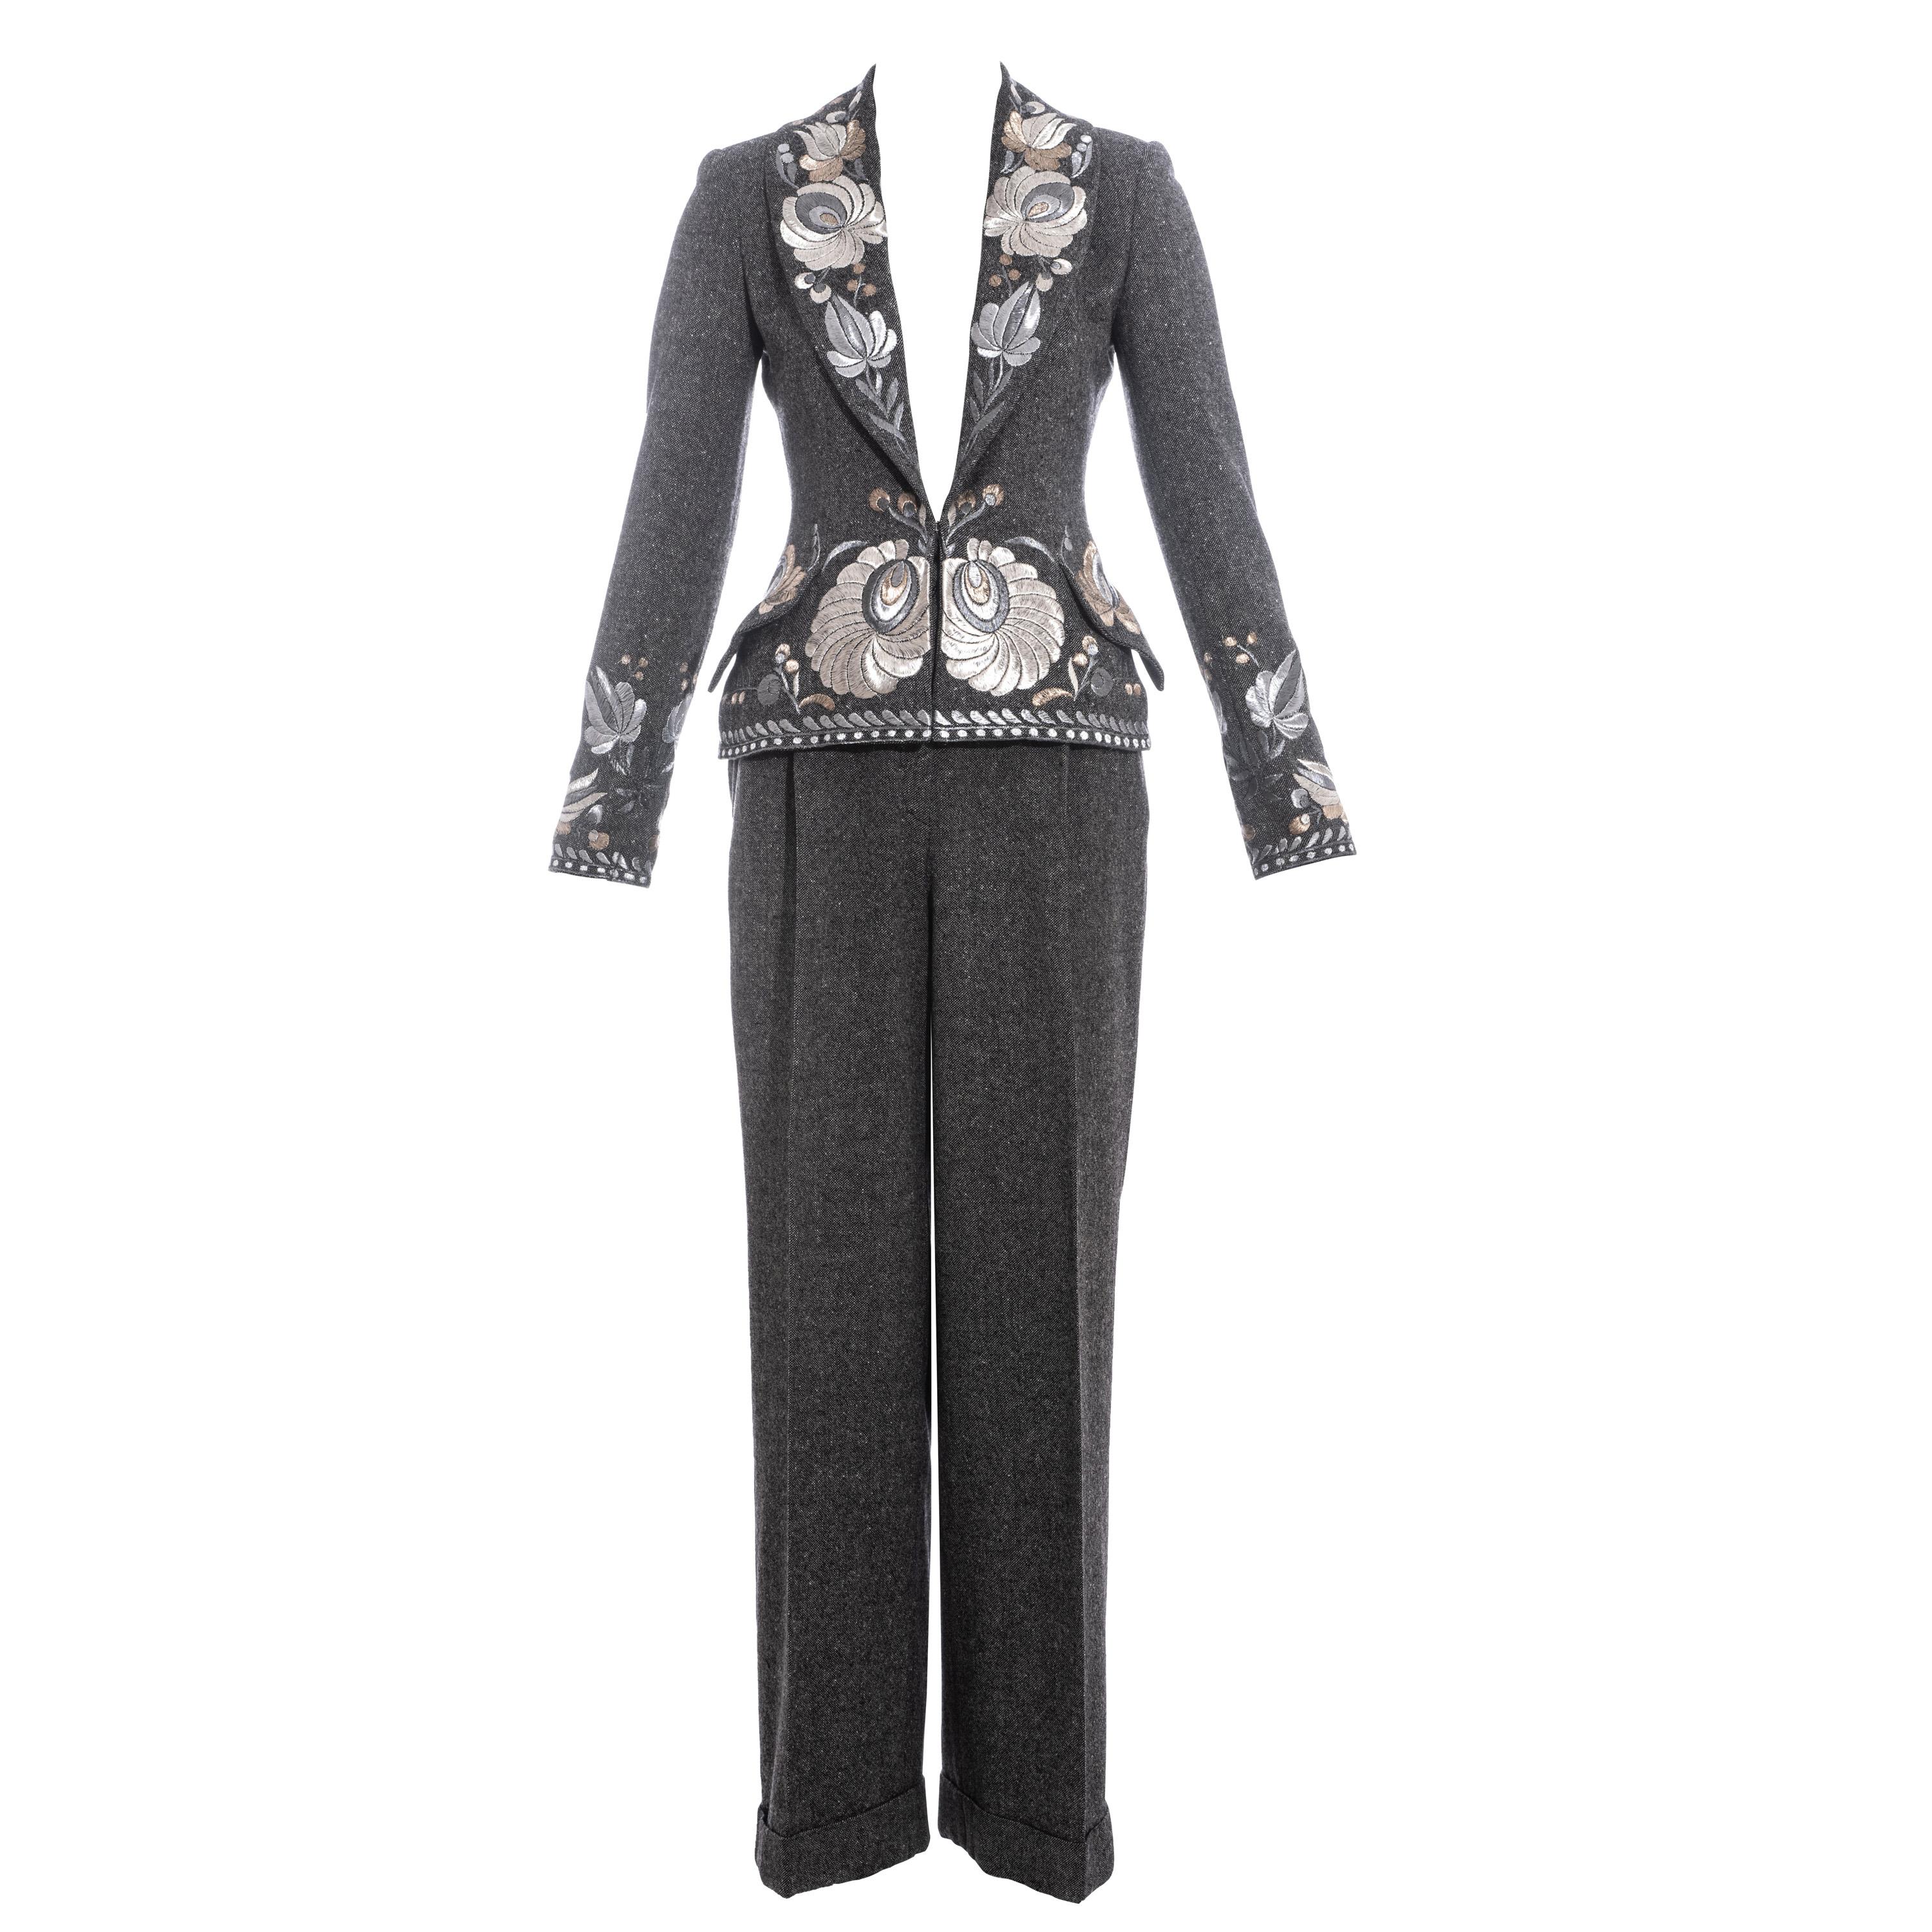 Christian Dior by John Galliano grey embroidered tweed pant suit, fw 1998